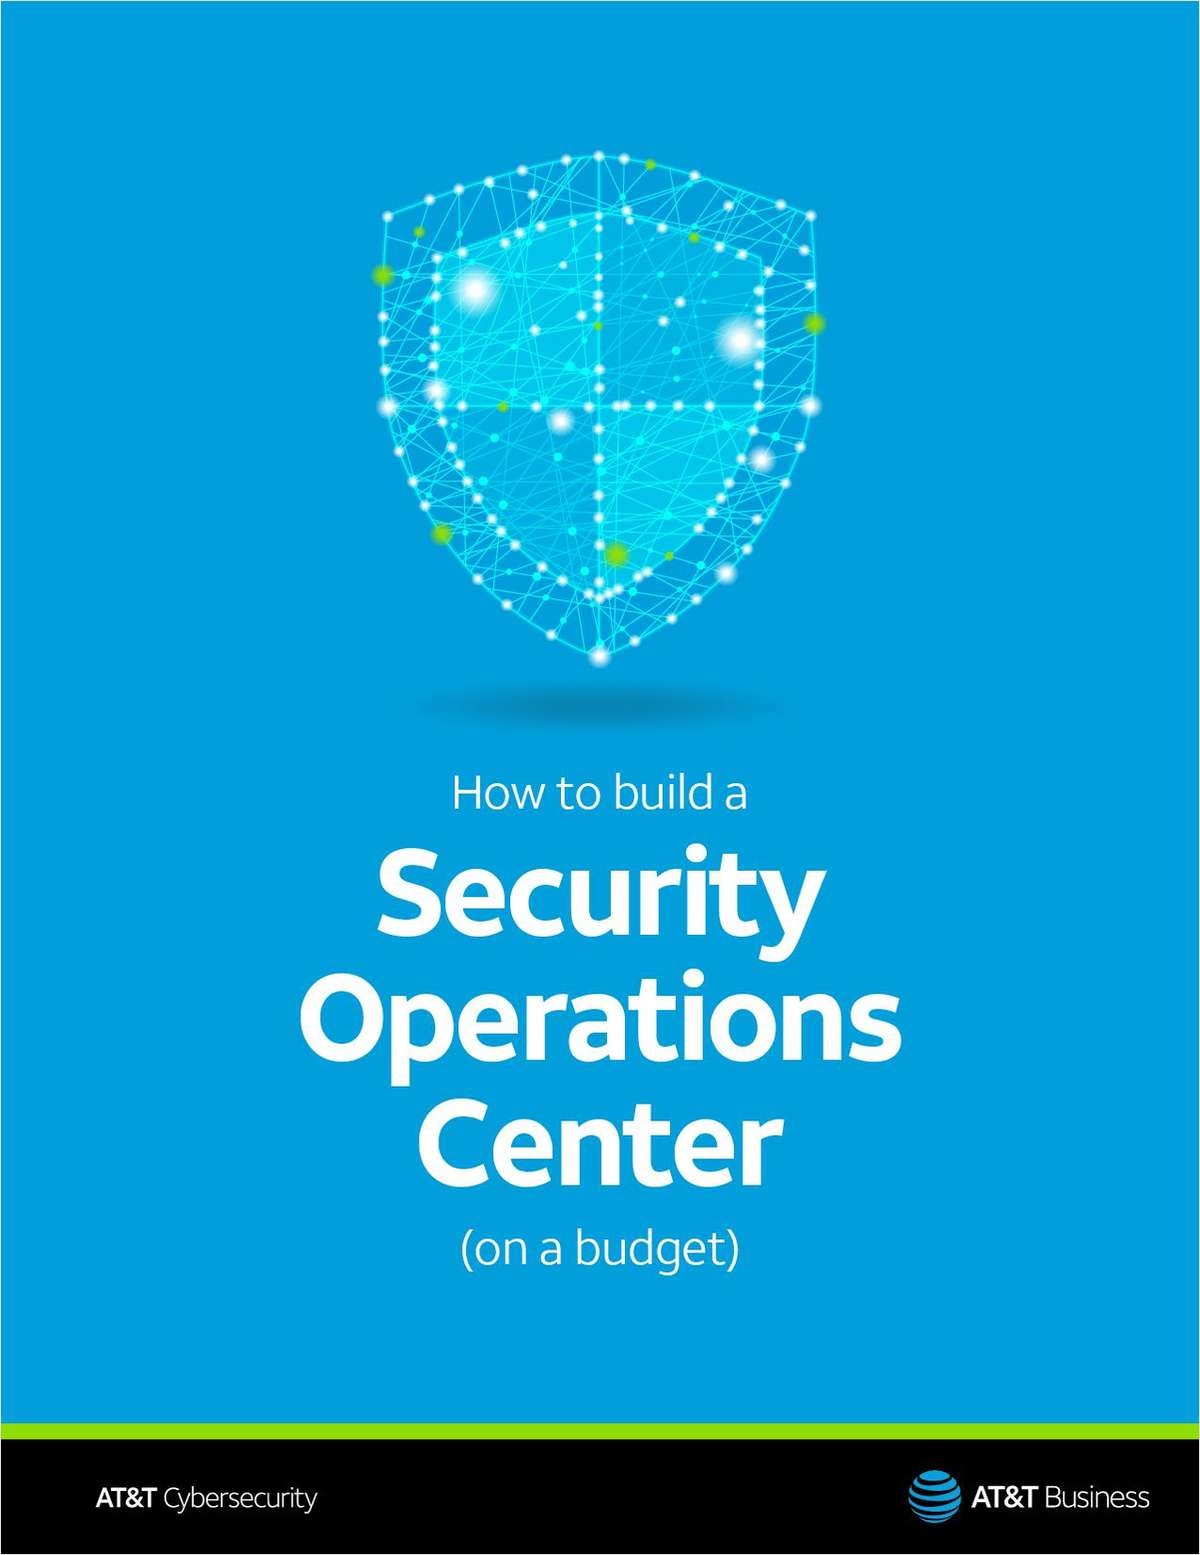 How to build a Security Operations Center (on a budget)